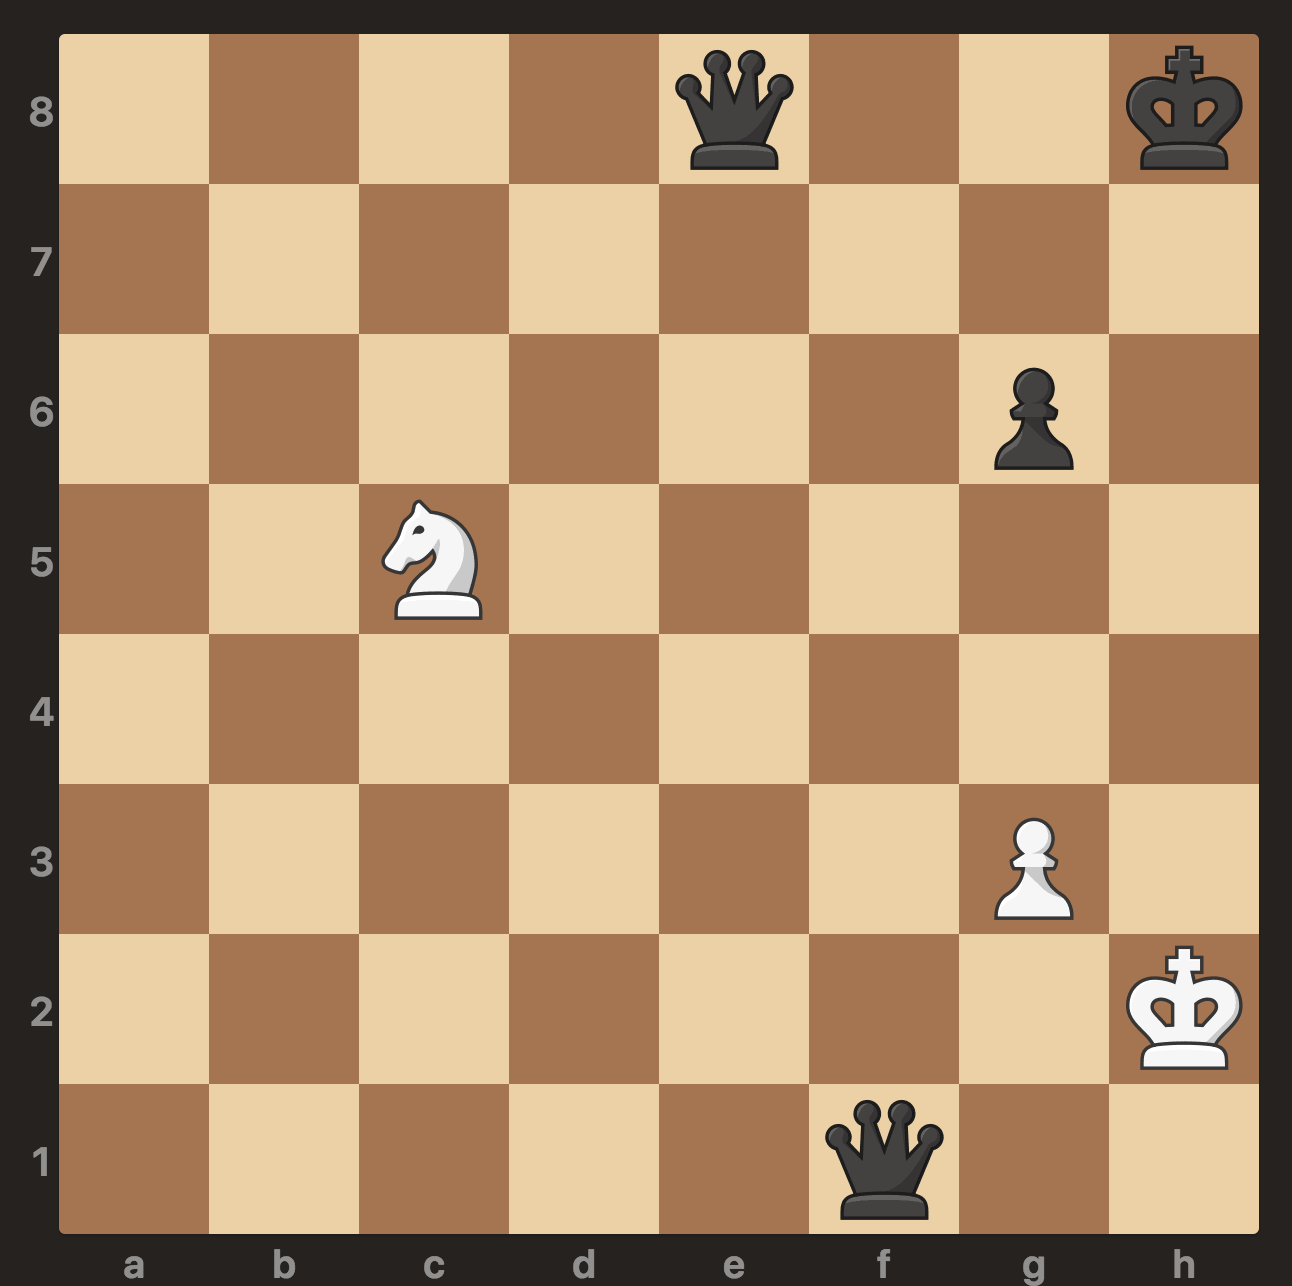 Checkmate in 2 –